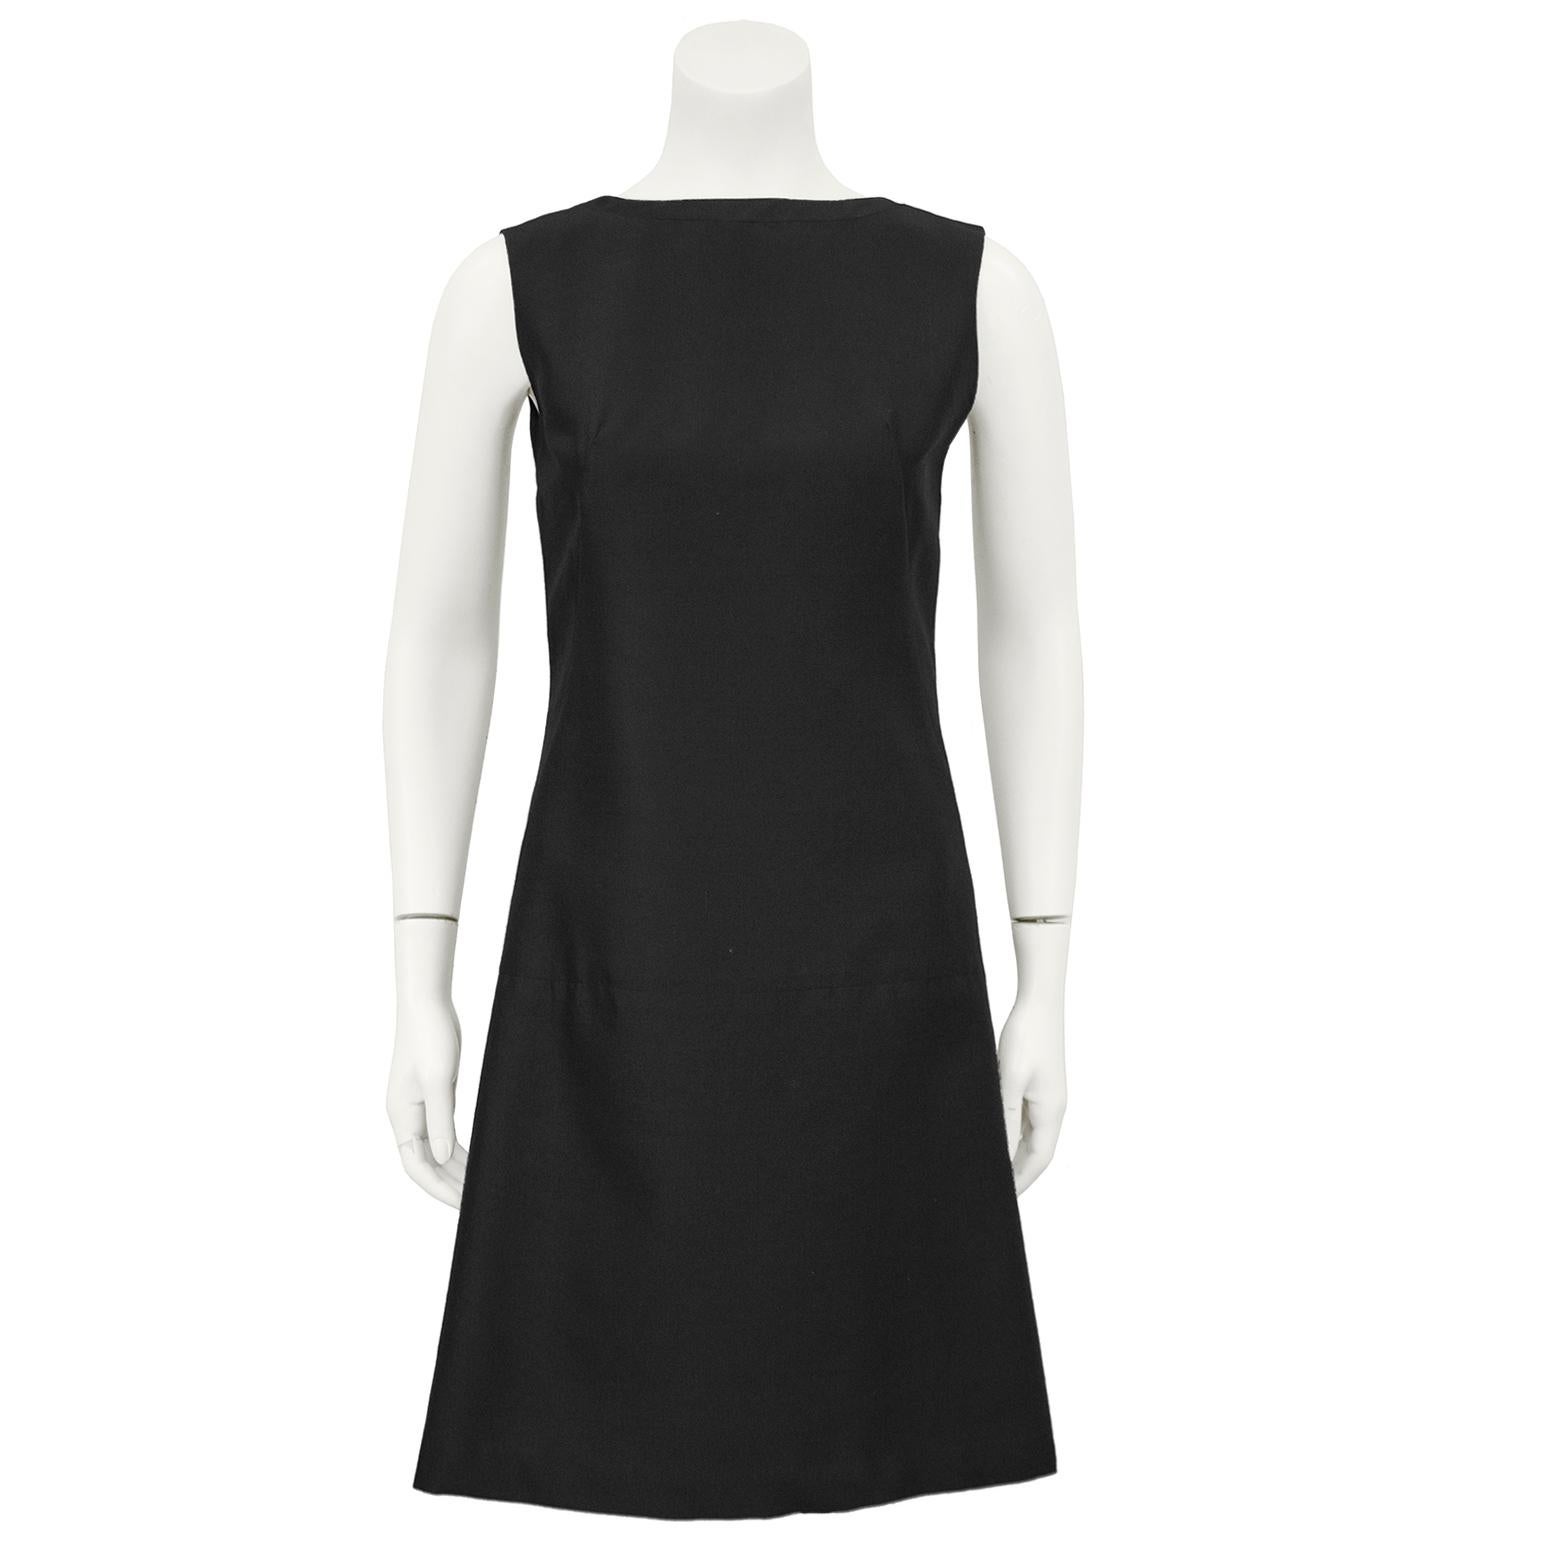 Adorable 1960s Lanz black wool shift style cocktail dress. The sleeveless dress fastens up the back with a series of hidden hooks and snaps to create a dramatic faux wrap detail accented with bows. Darts down the front of the dress, fits like a US